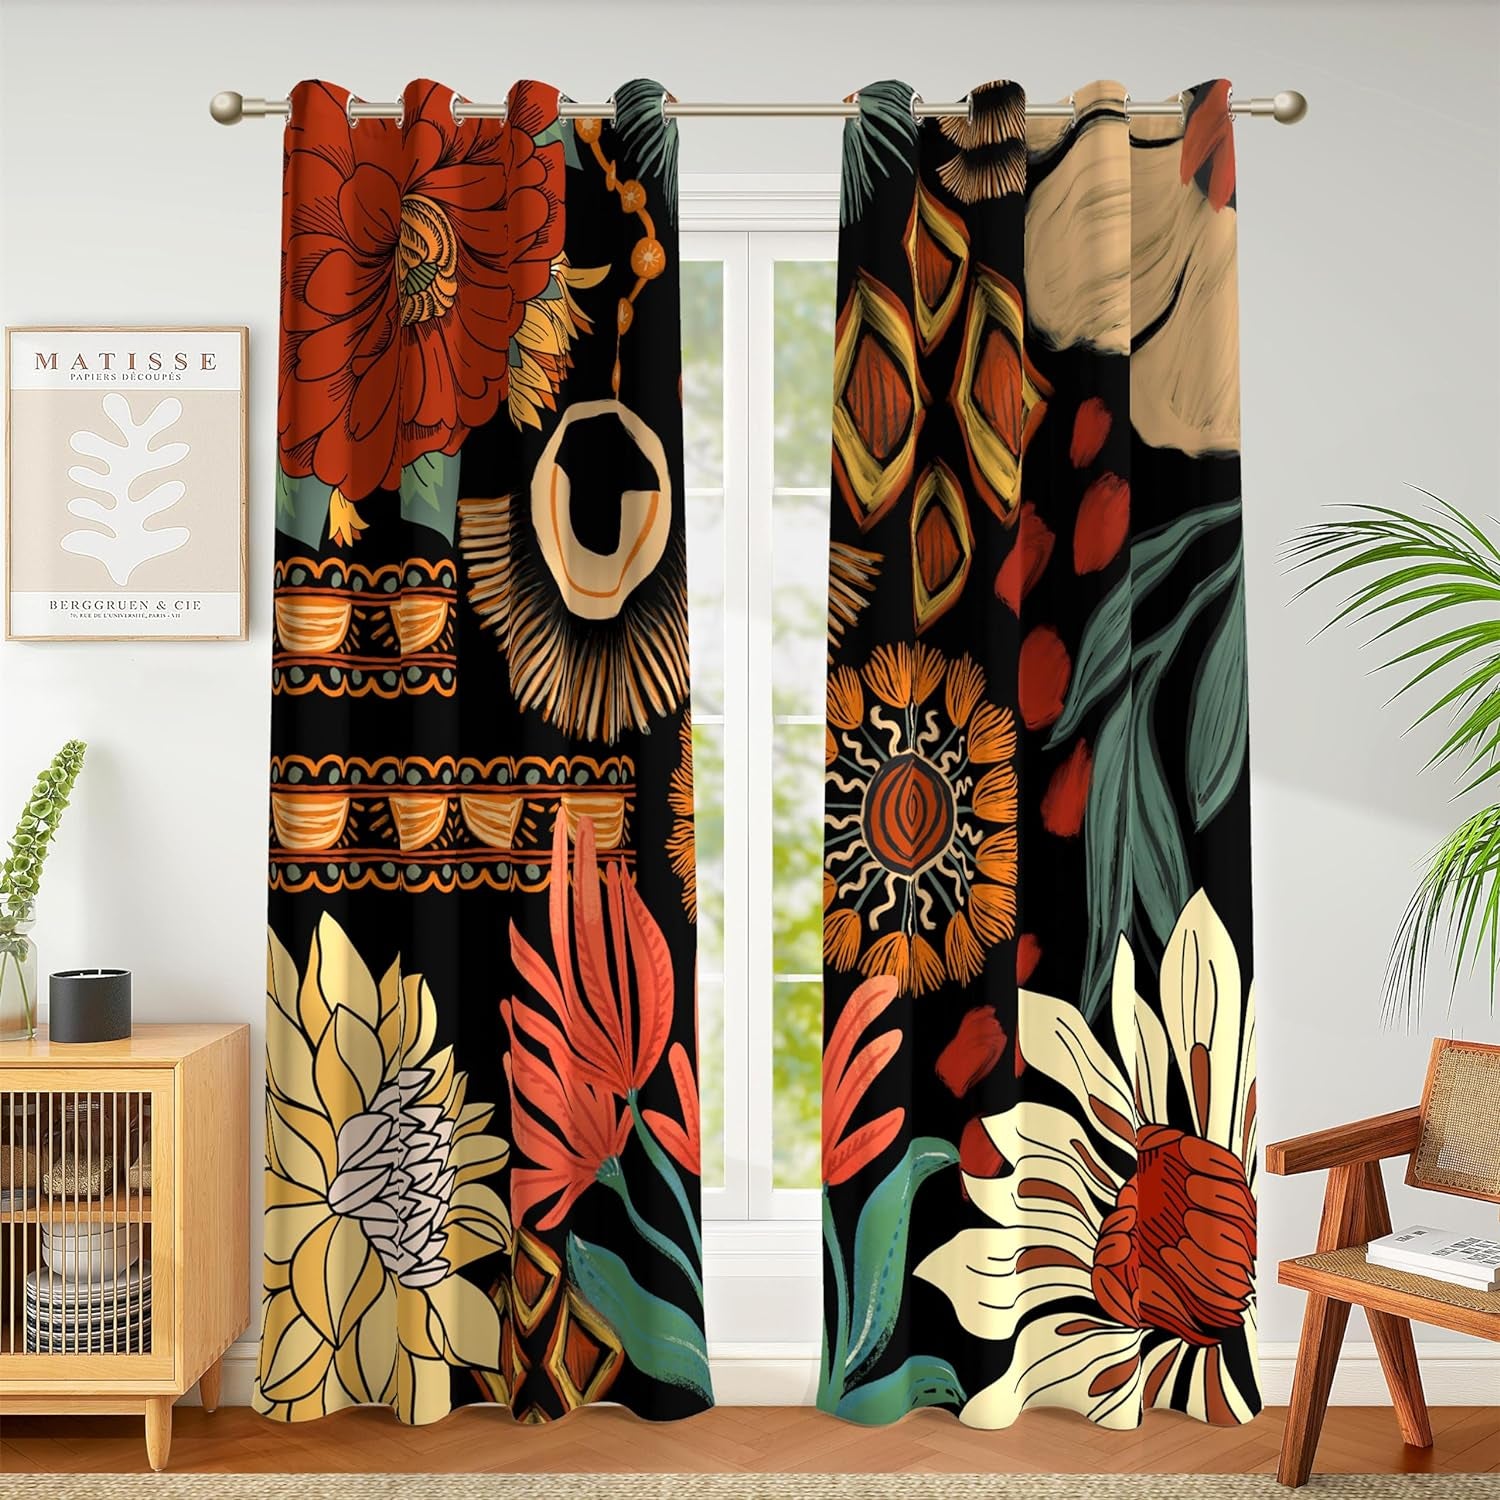 Boho Floral 100% Blackout Curtains for Living Room 96 Inch Long 2 Panels Mid Century Botanical Black Out Curtains for Bedroom Grommet Thermal Insulated Room Darkening Window Drapes,52Wx96L  Tyrot Black Boho Floral 52W X 84L Inch X 2 Panels 